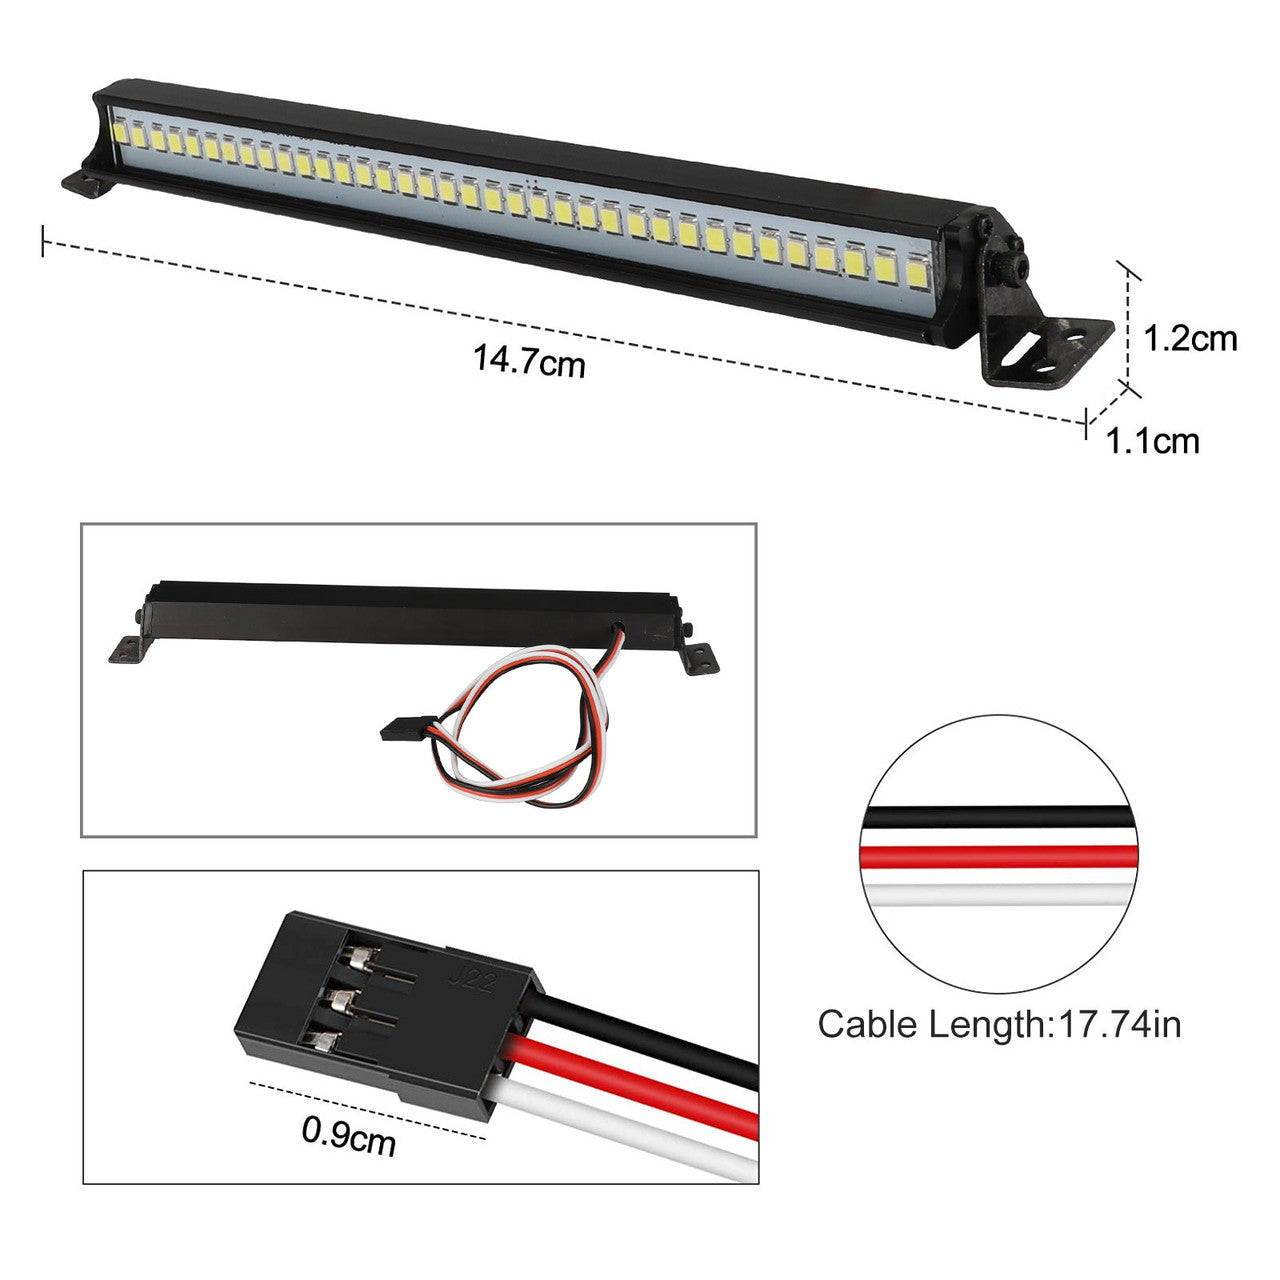 Super Bright 36 LED Light Bar Roof Lamp For Automotive Vehicles